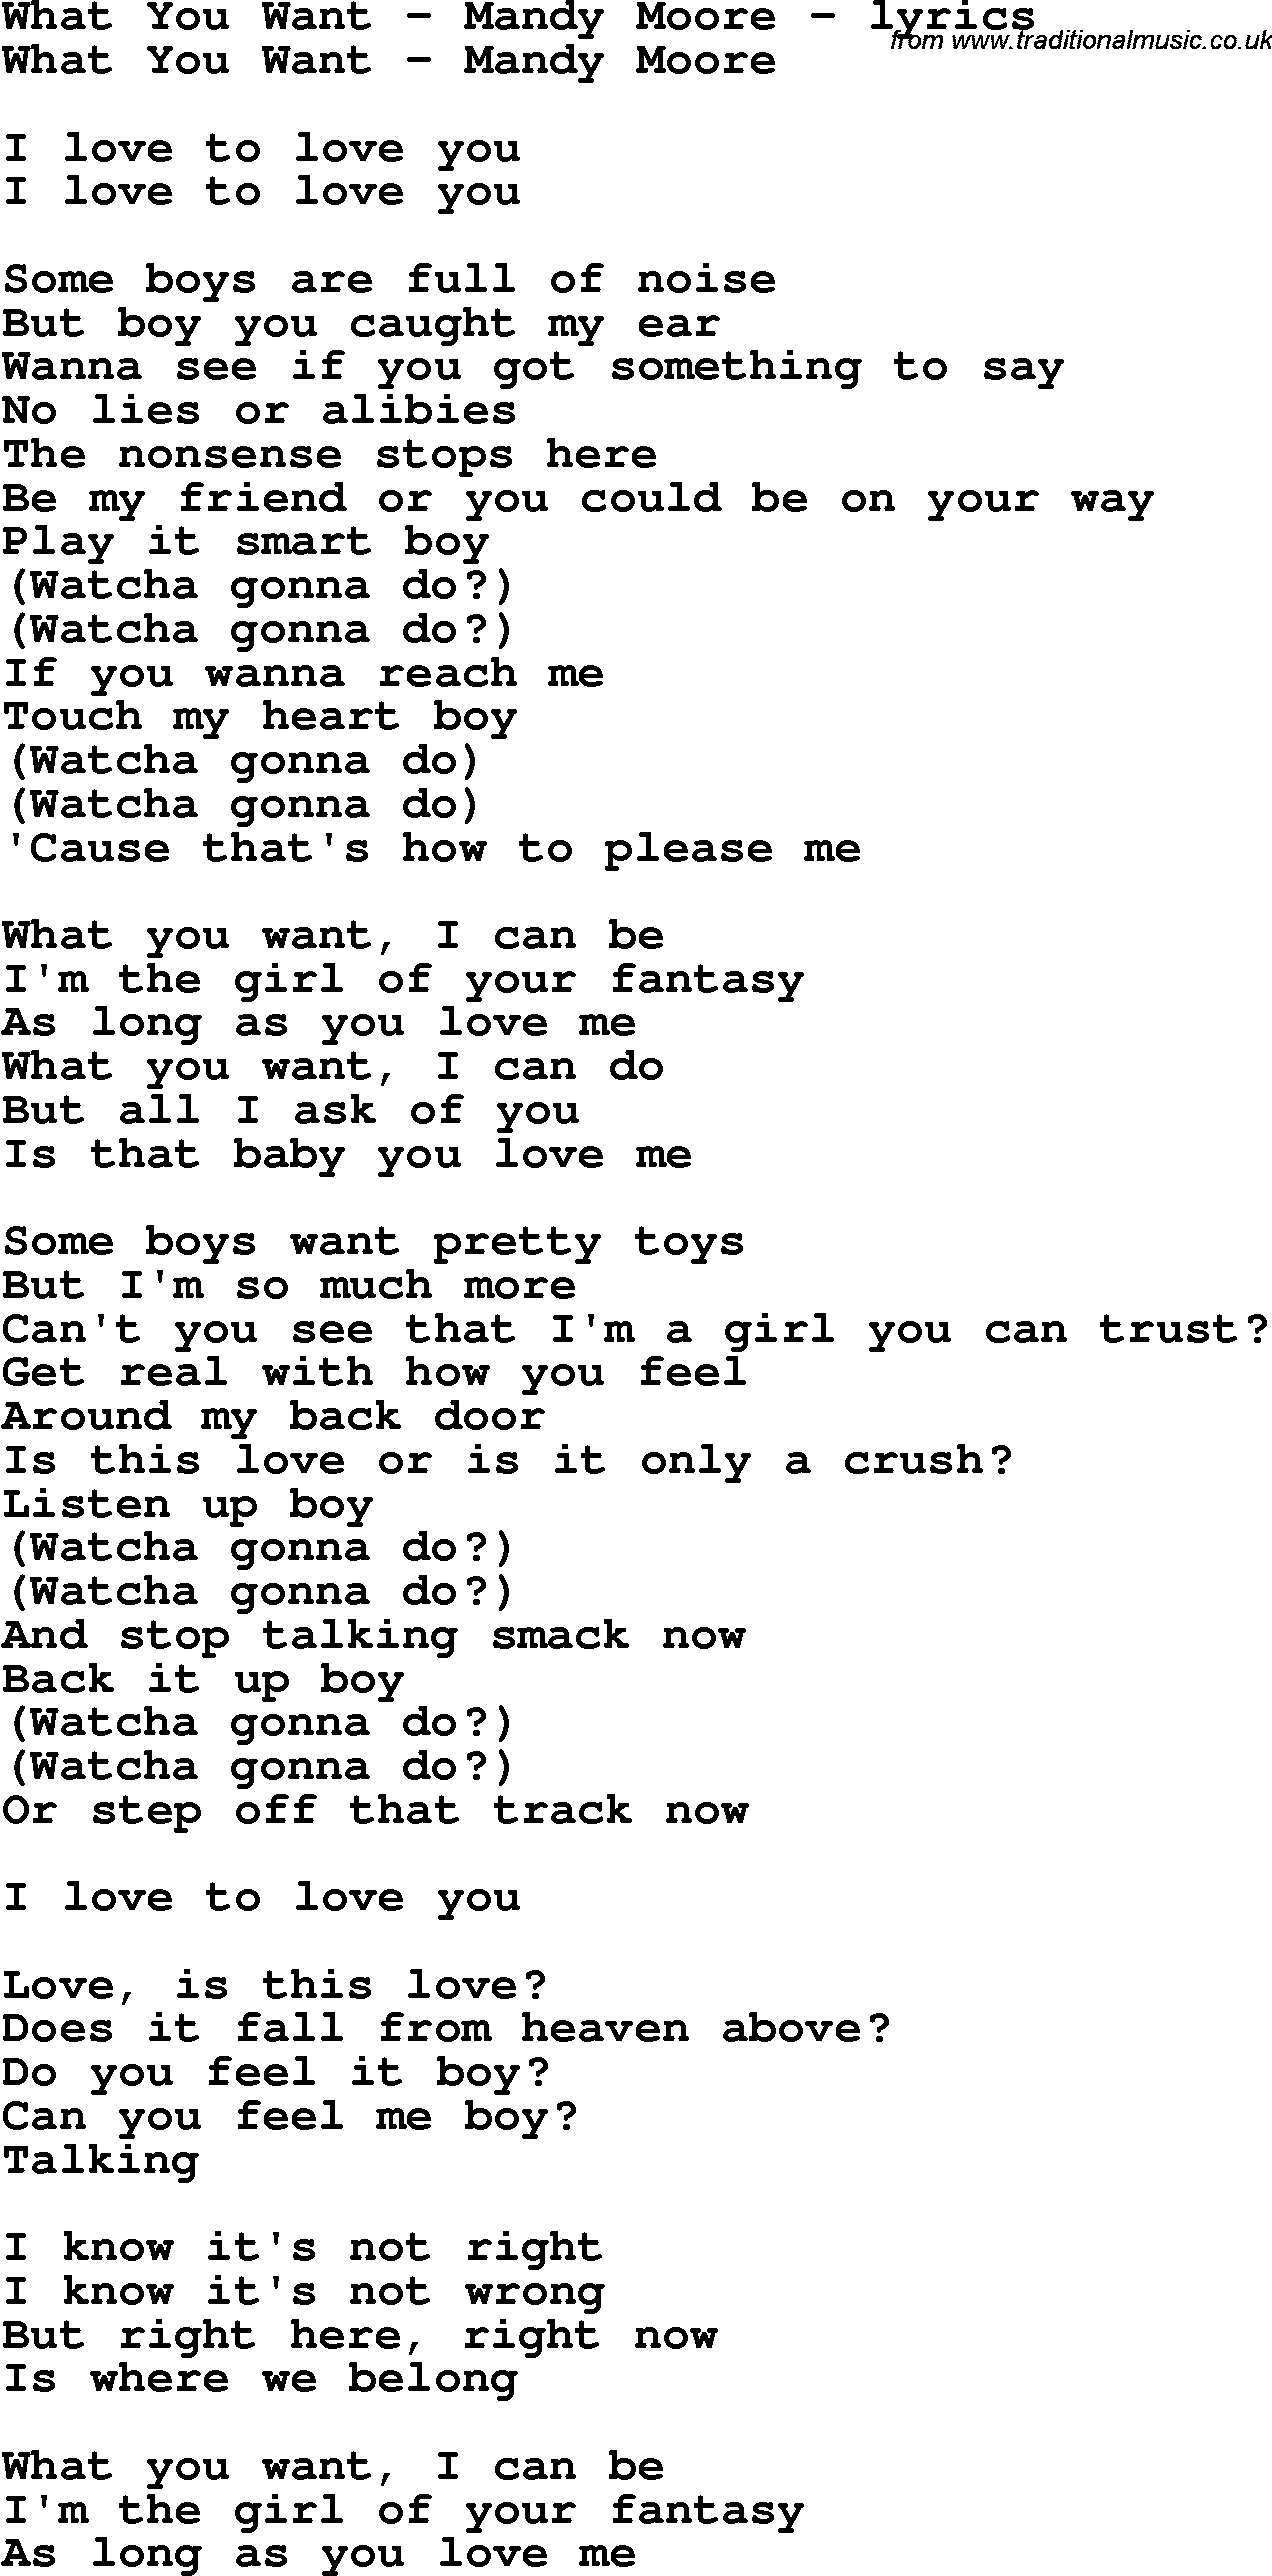 Love Song Lyrics for: What You Want - Mandy Moore